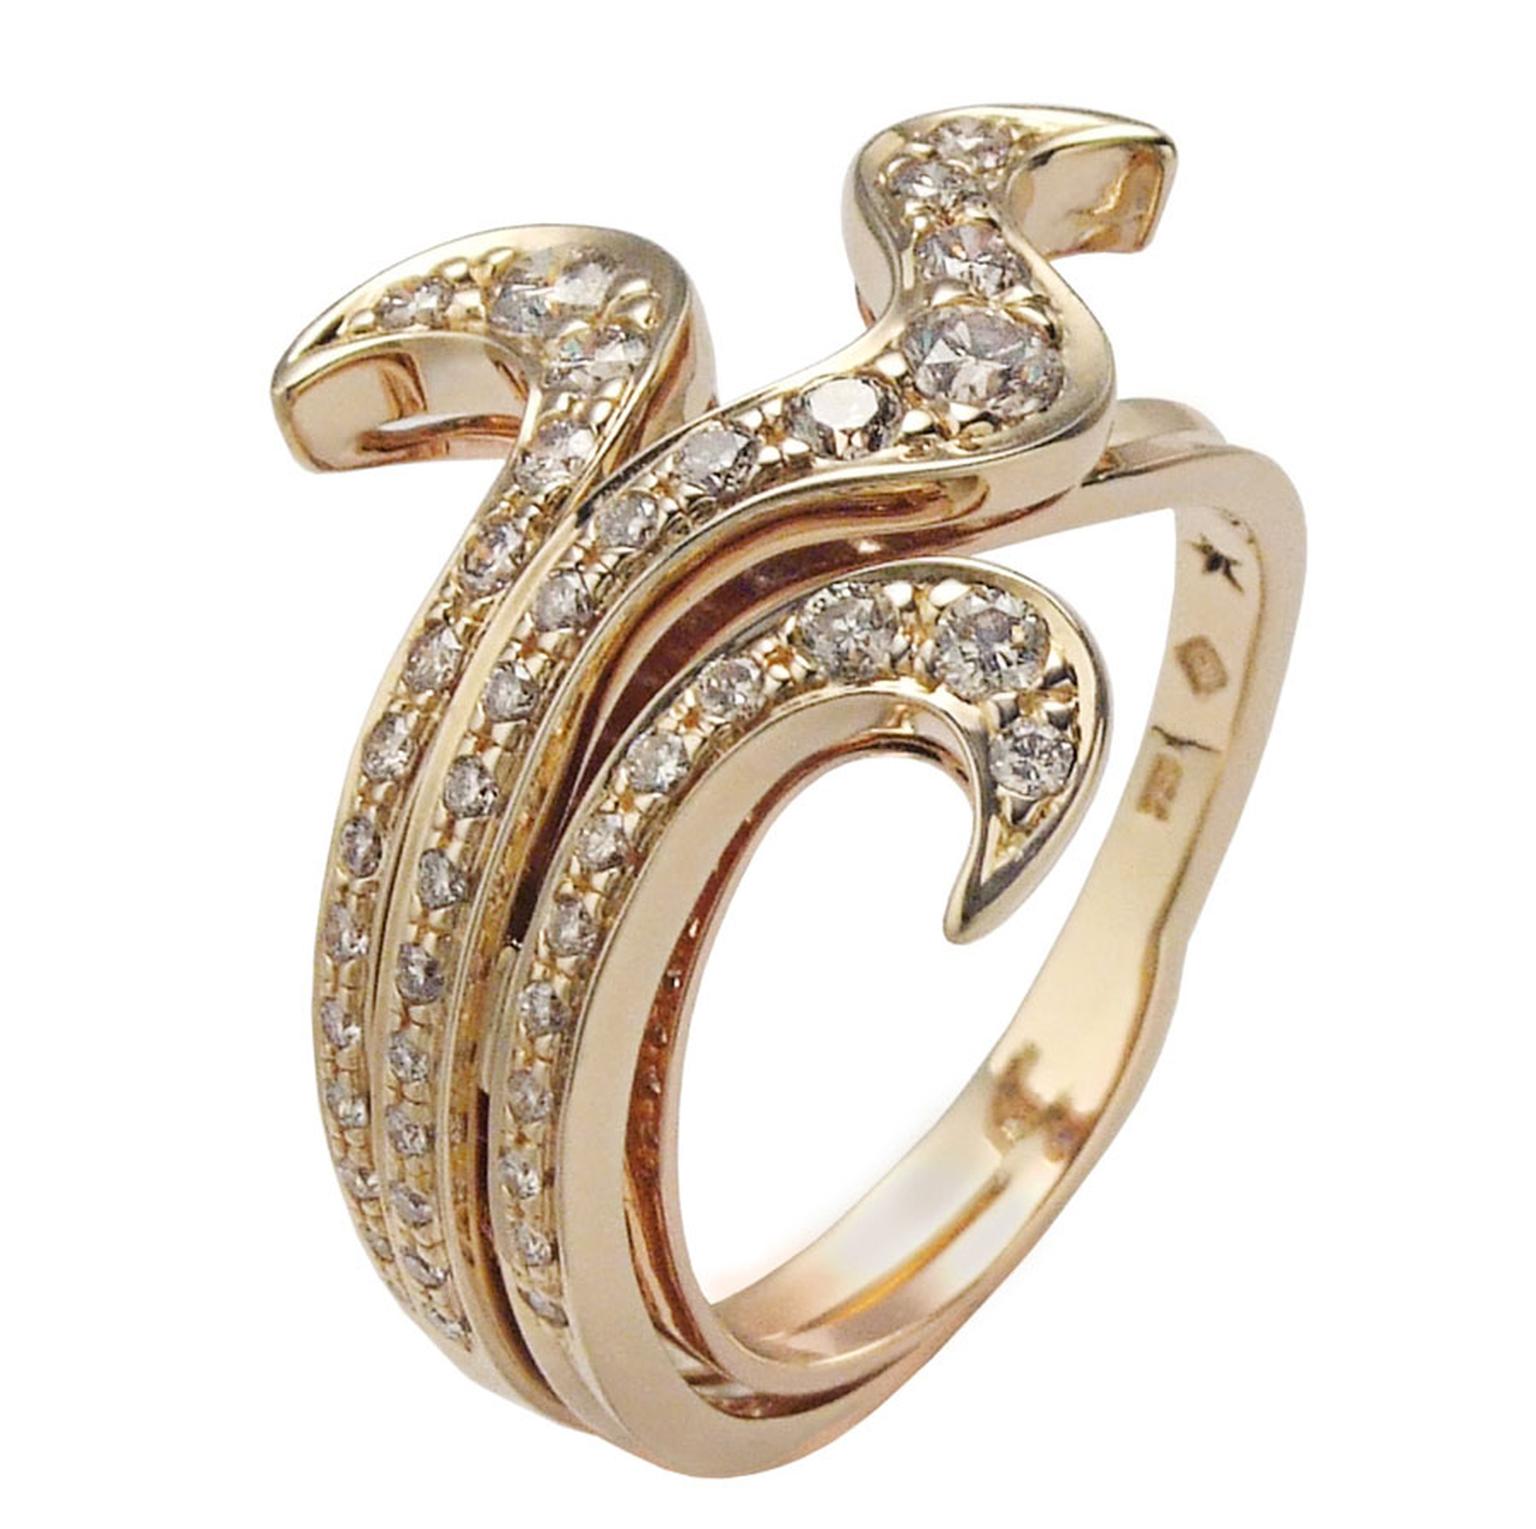 H-Stern-Ring-in-yellow-and-rose-gold-with-diamonds-2.jpg